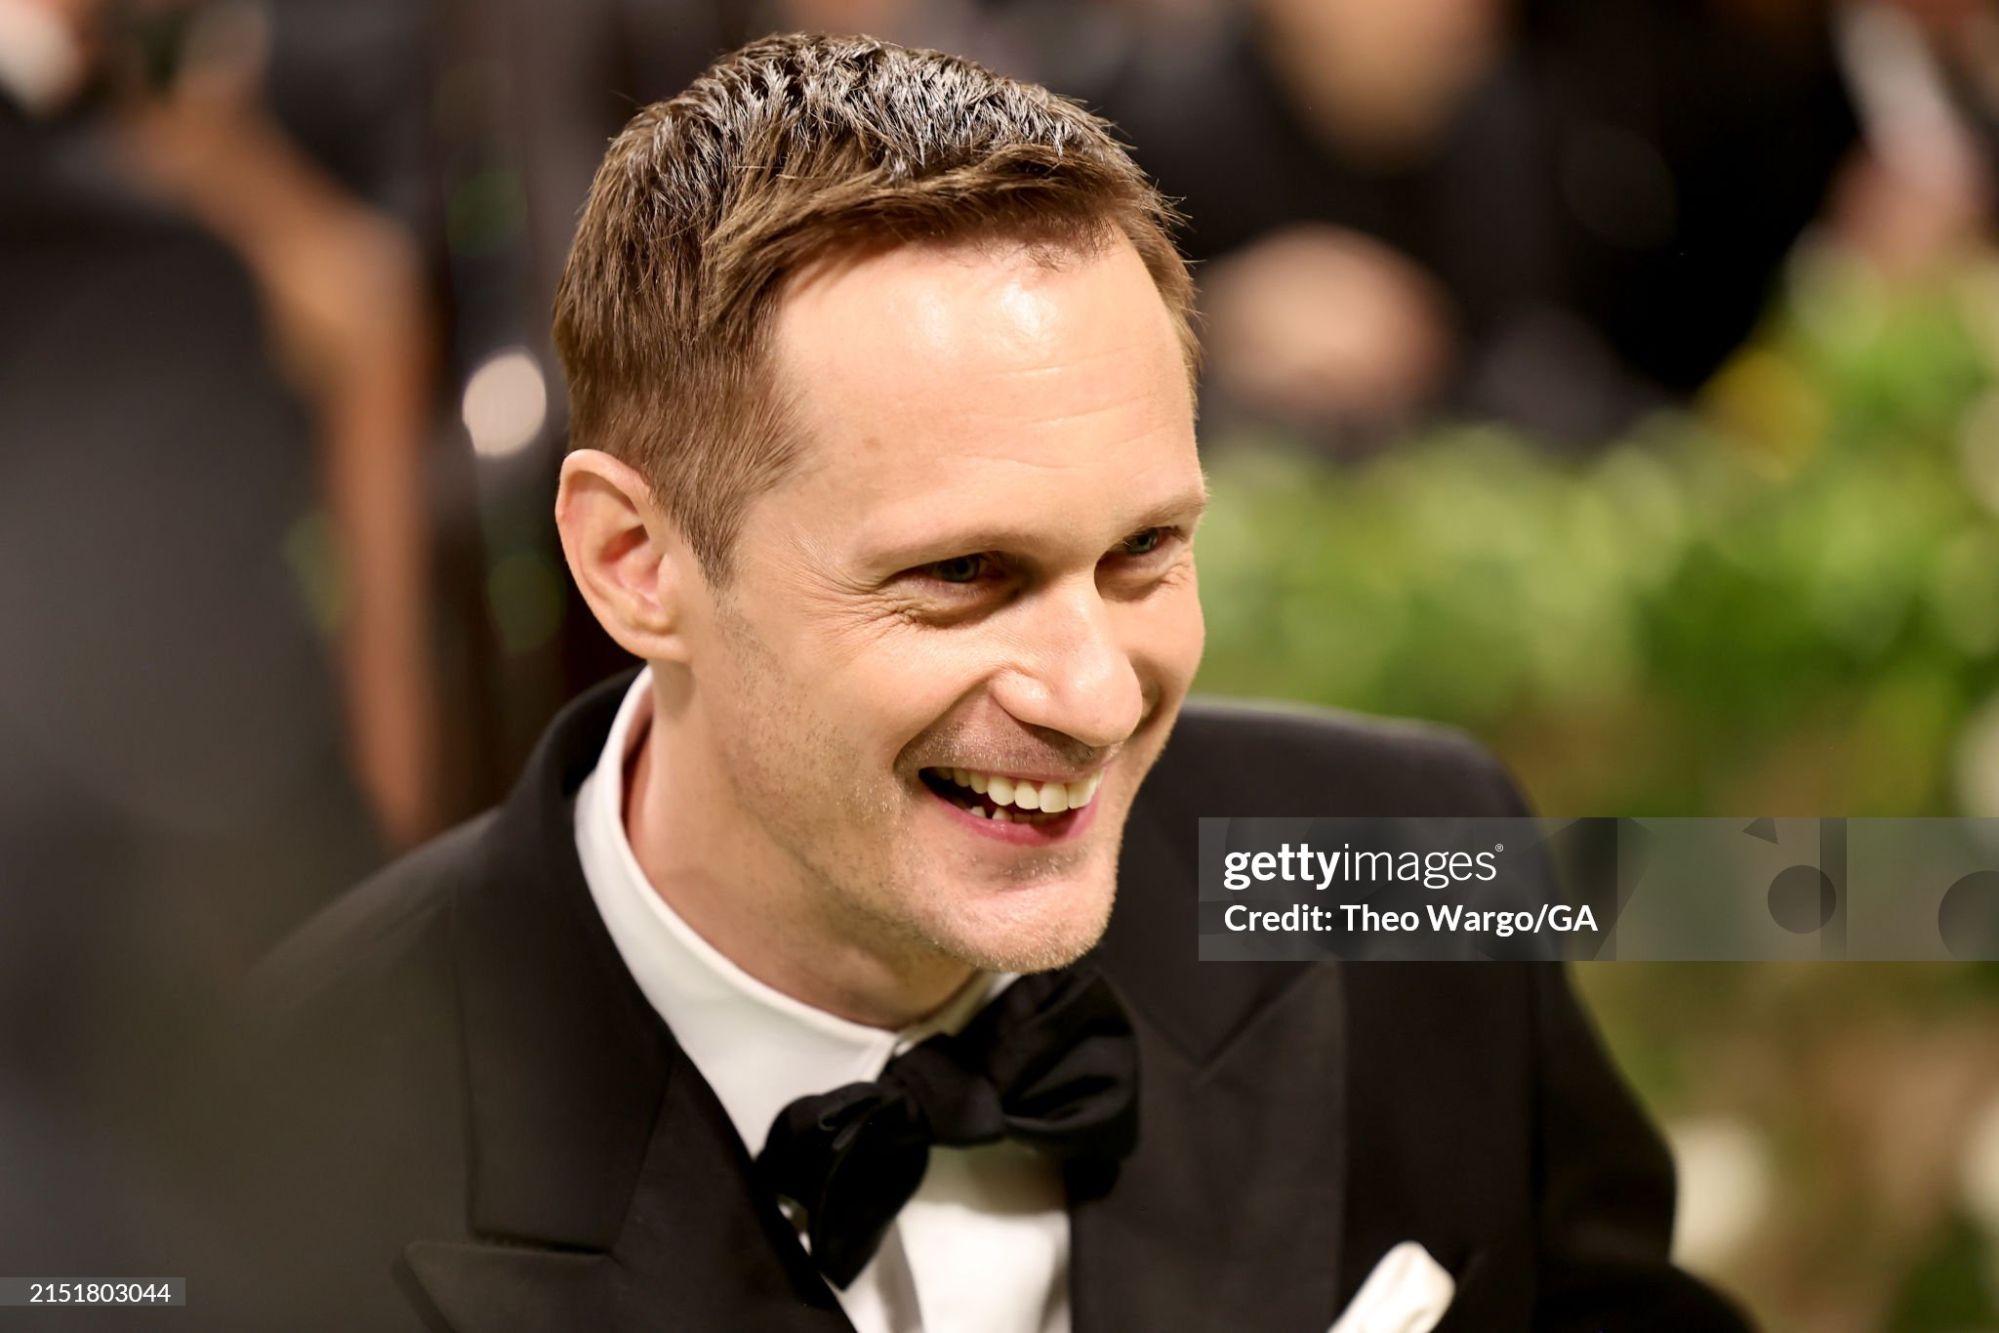 gettyimages-2151803044-2048x2048.jpg